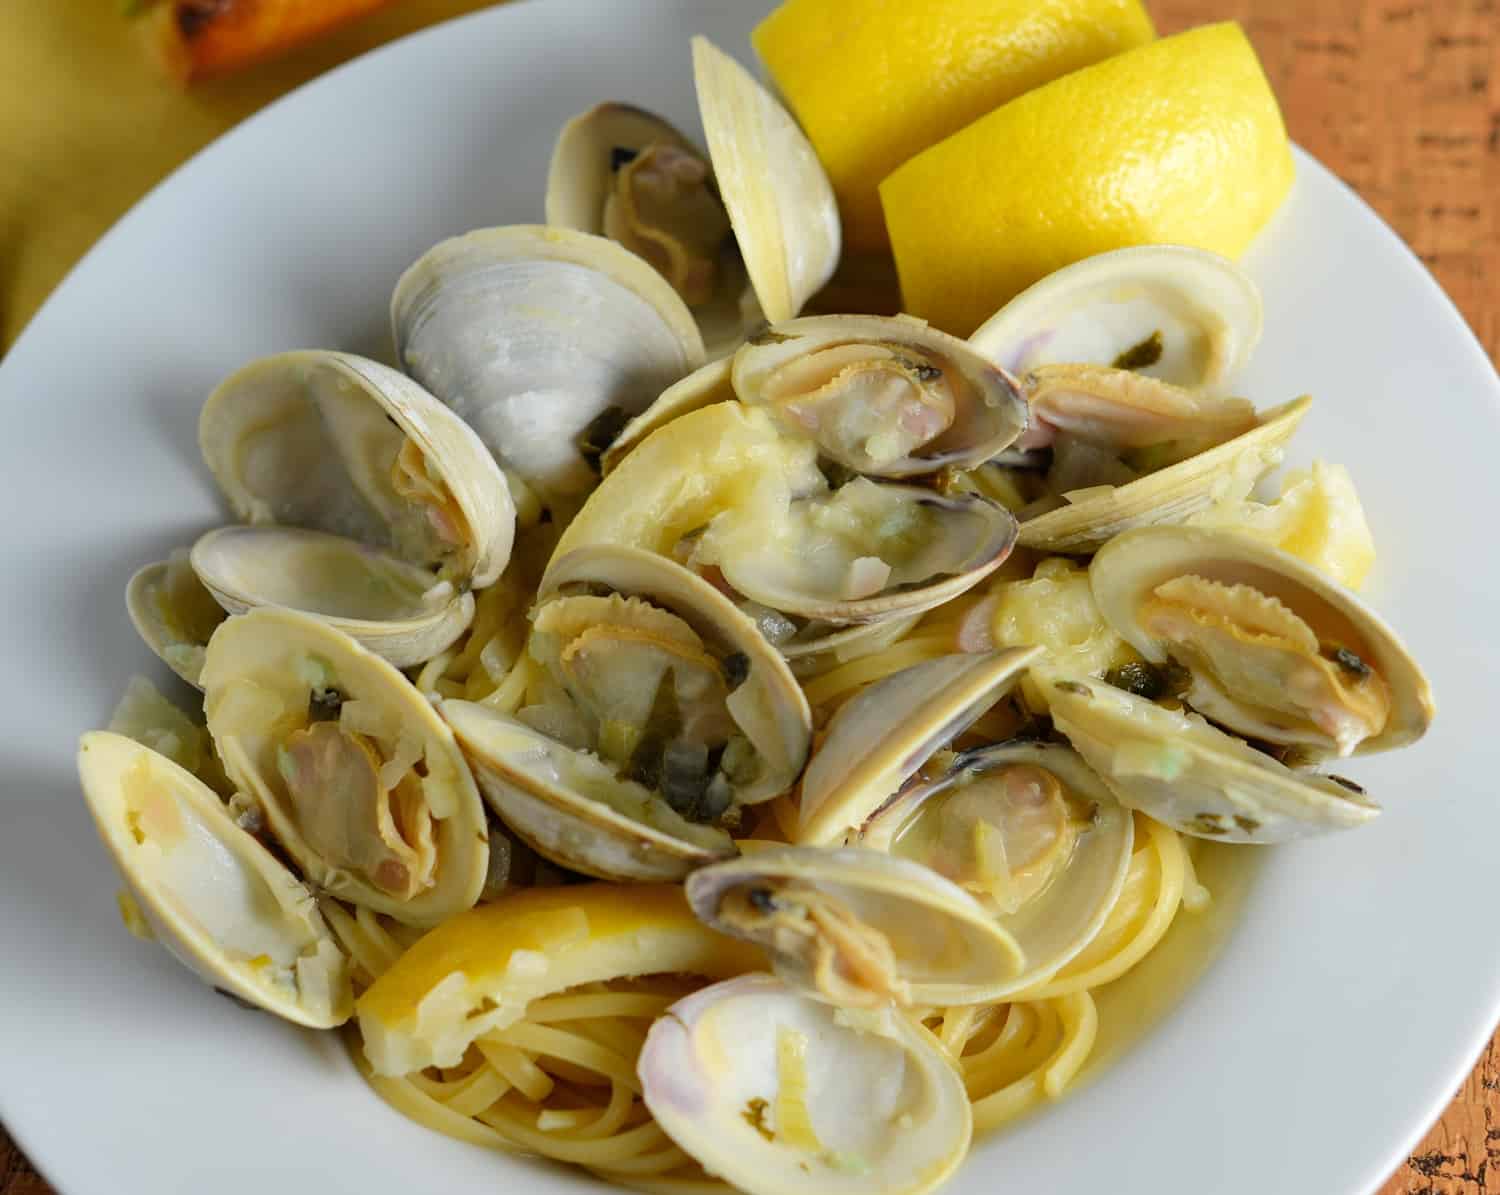 Linguine with White Clam Sauce, just like at the restaurant. Buttery broth, chopped and whole clams in an easy shallot, garlic and parsley sauce. #seafoodpastarecipe #easyseafoodrecipes www.savoryexperiments.com 